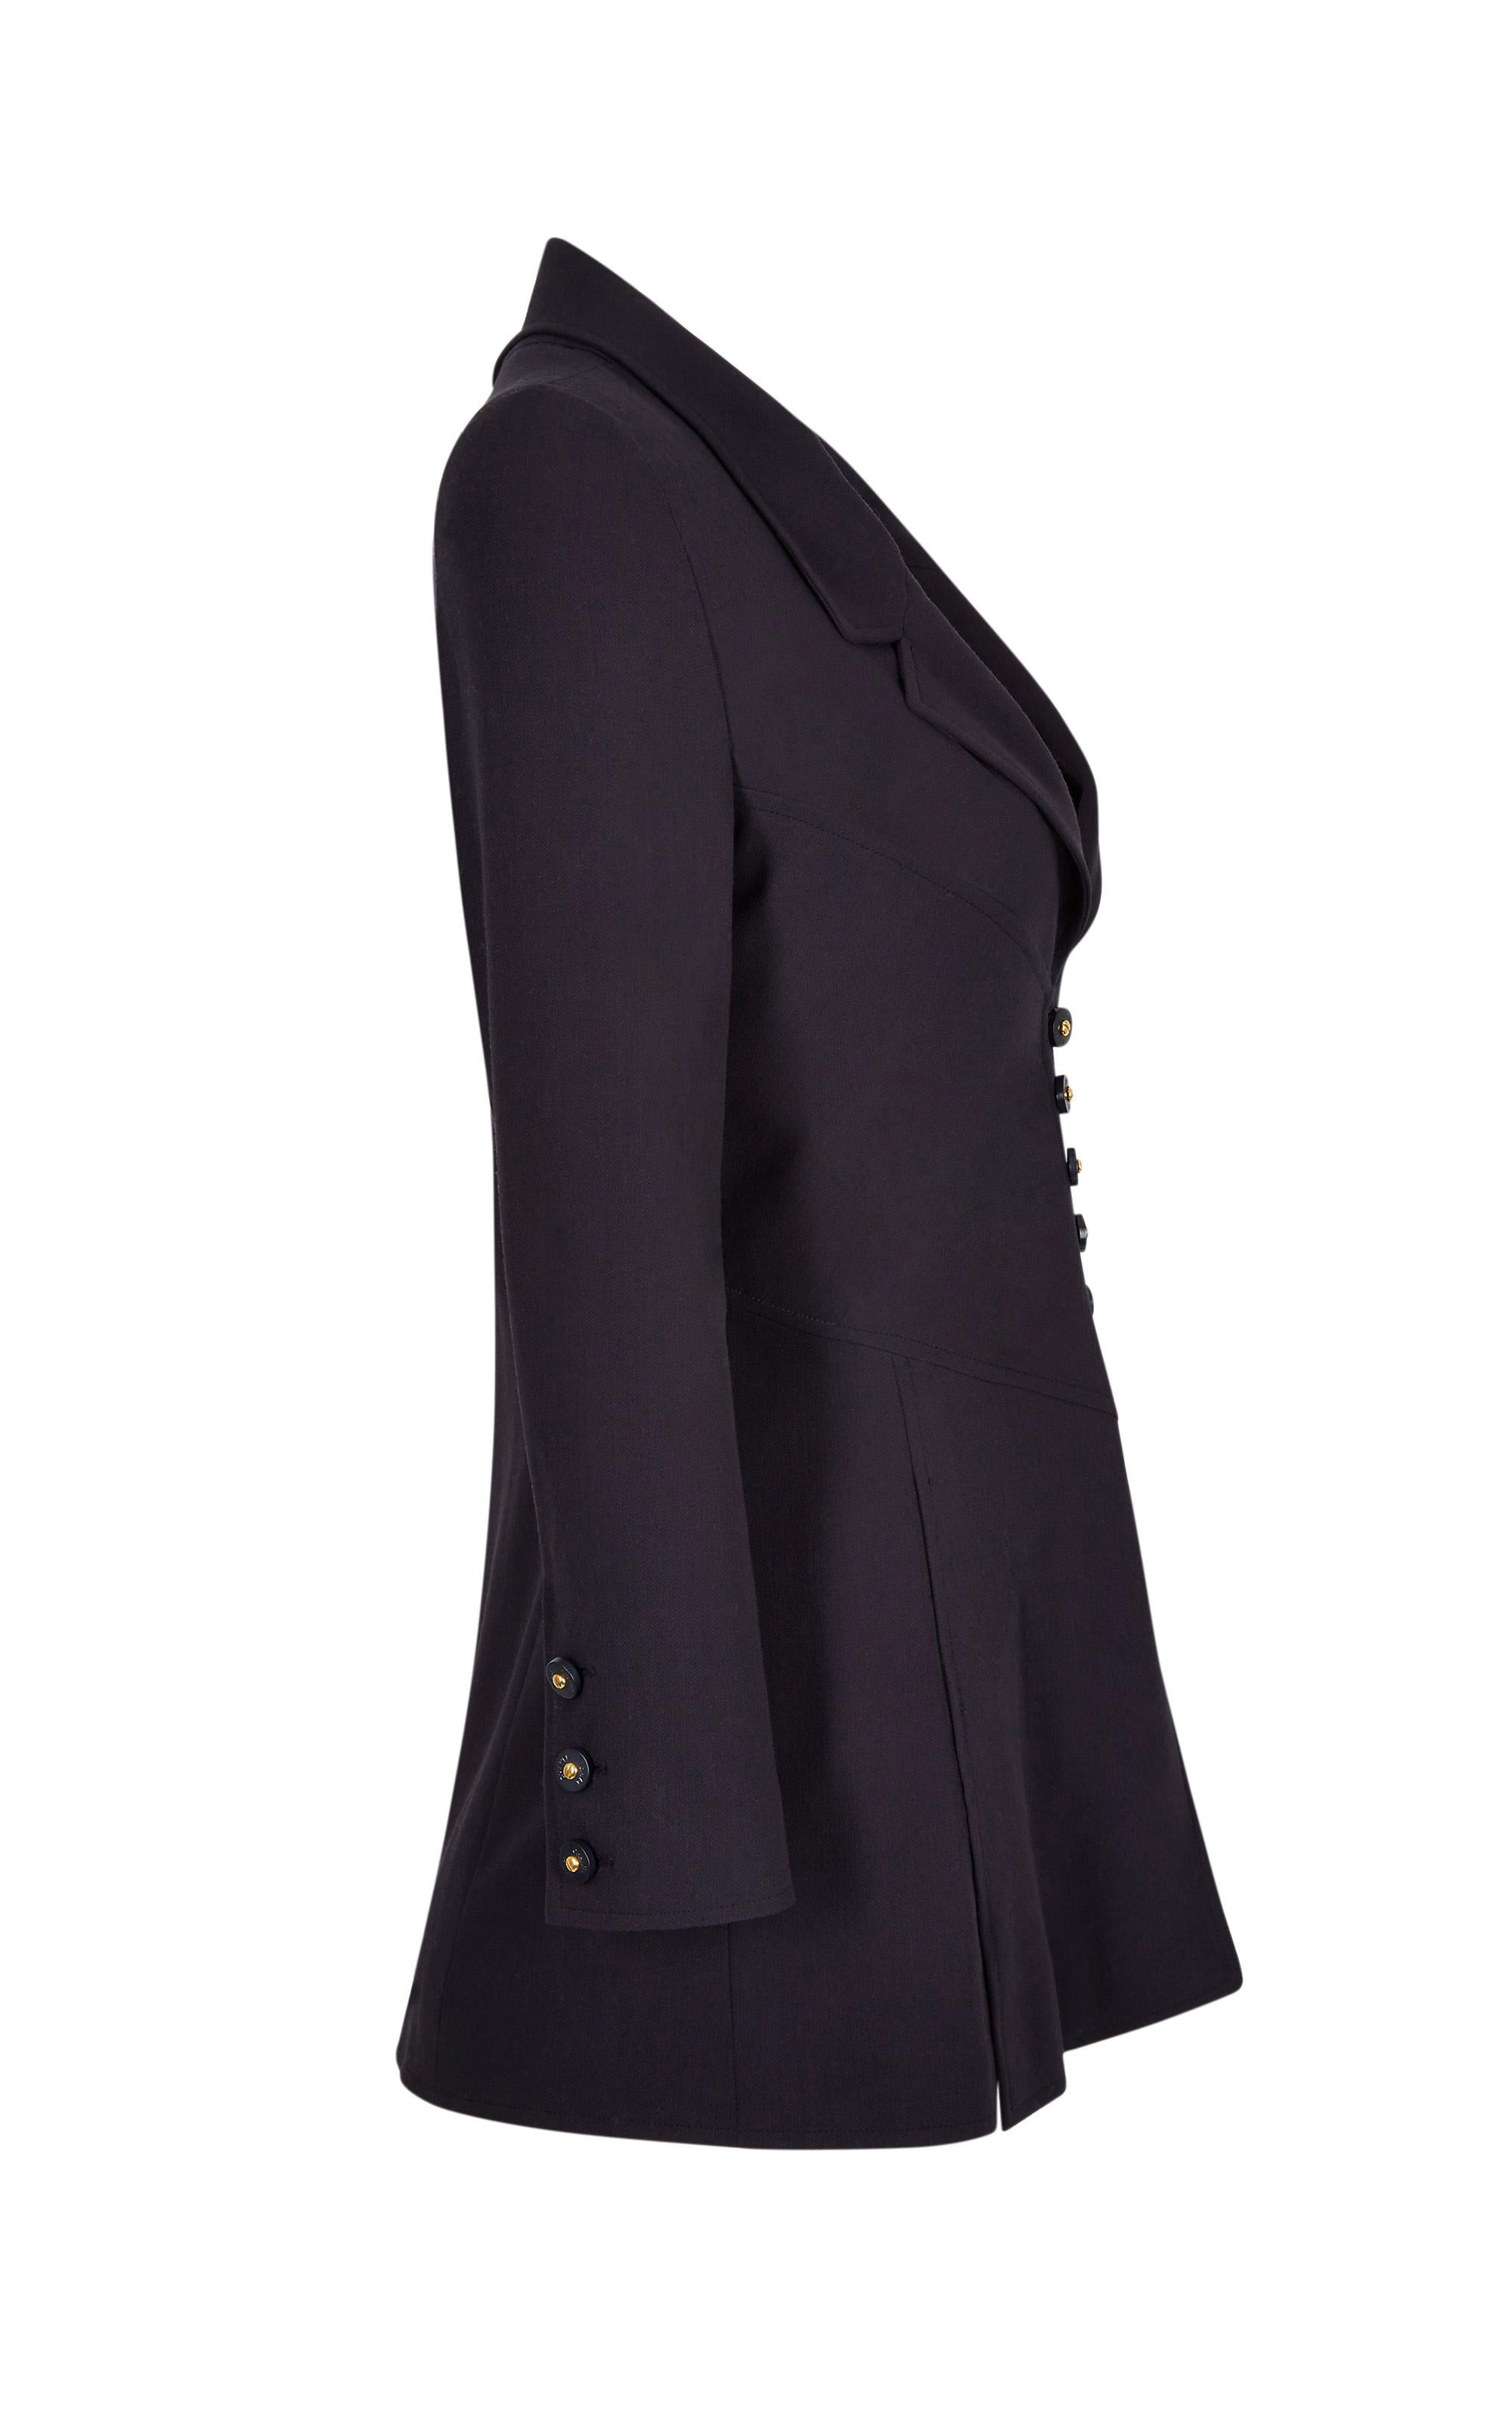 This striking Chanel black fine wool blazer is from the 1997 Spring collection and is in impeccable vintage condition with a sharp, elegant line. It has a lapel collar that fastens into a plunging V neckline above the central button stand and